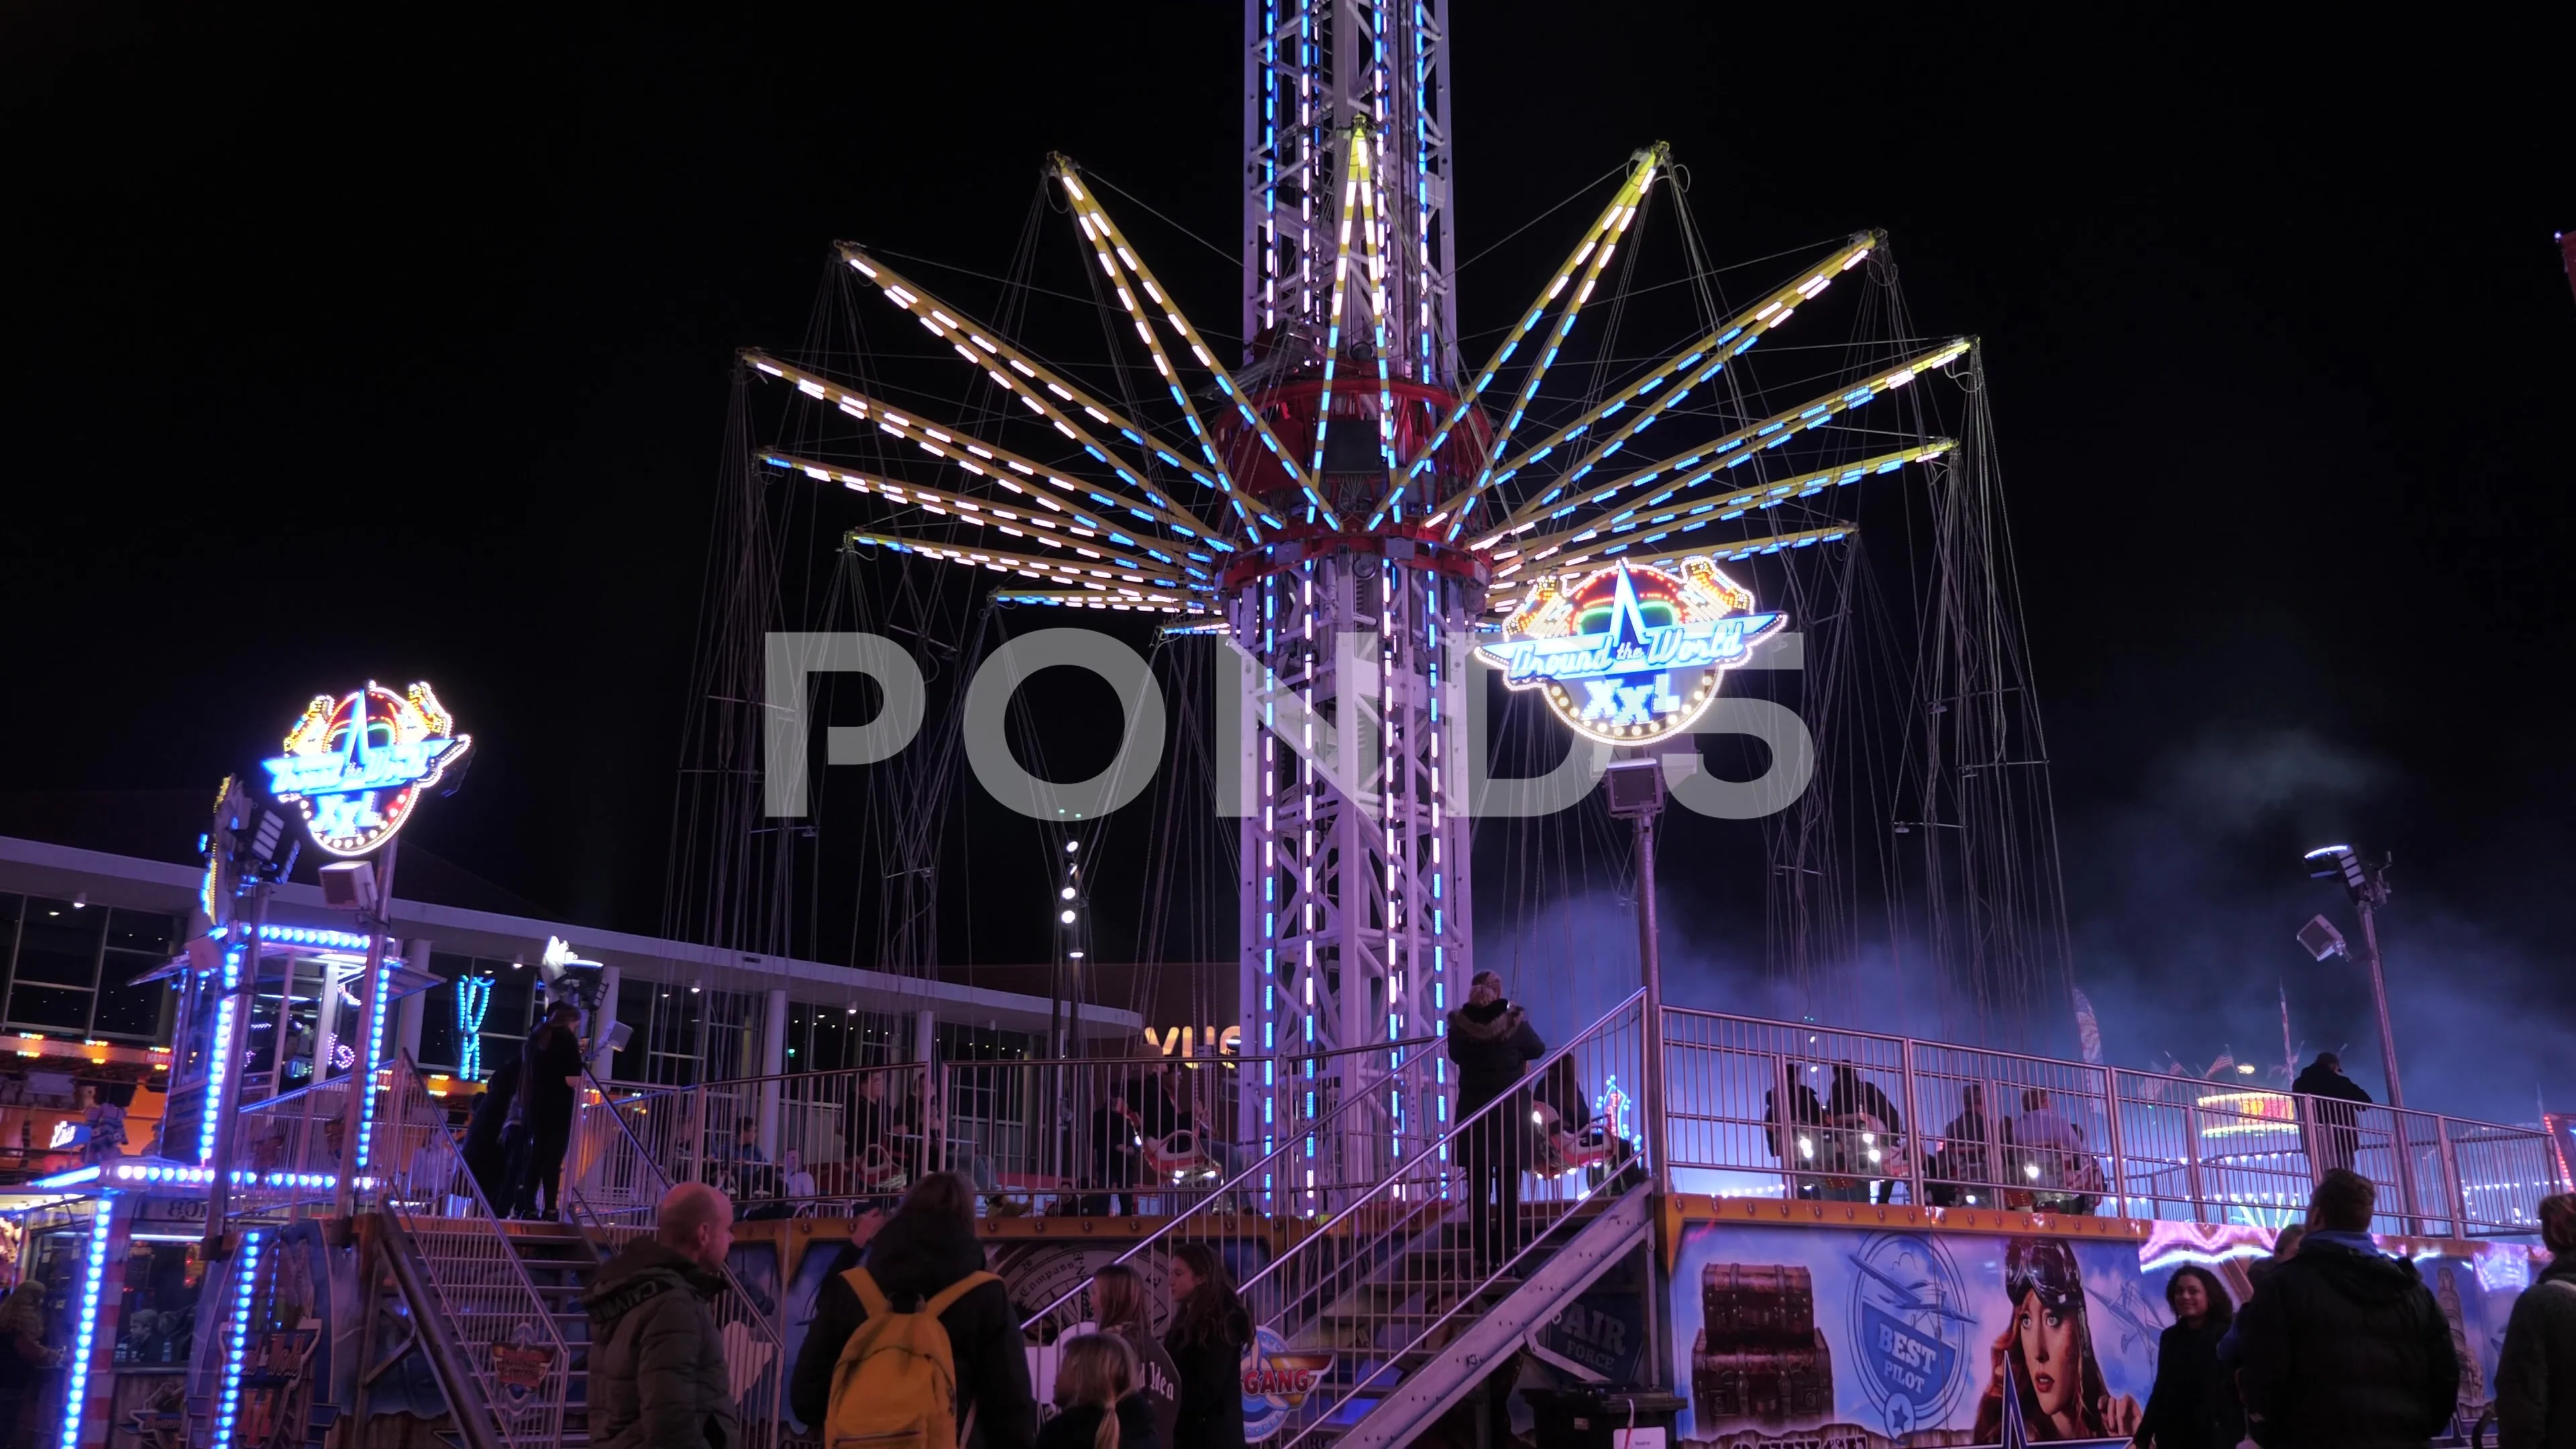 People On Tower Swinger Ride In Amusement Park at night at anual funfair